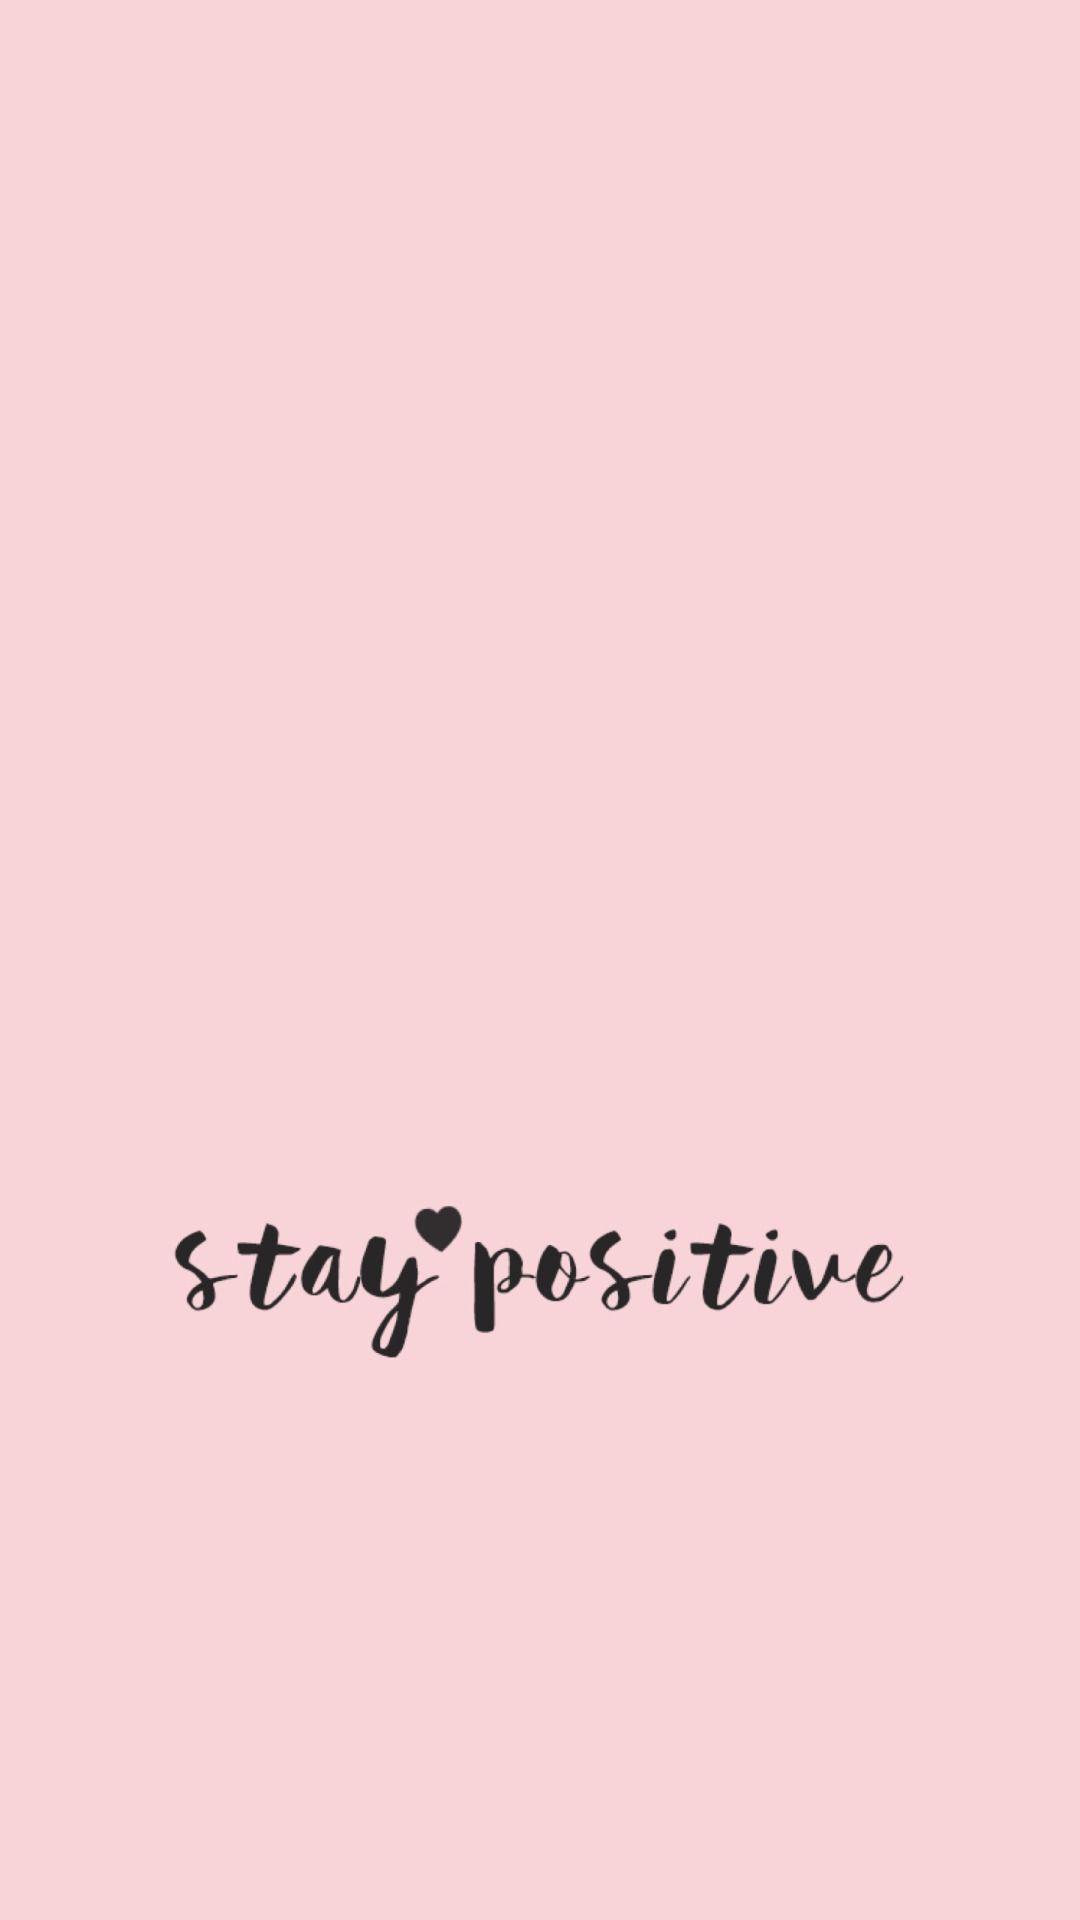 stay positive wallpaper background iphone XS max  Positive wallpapers  Iphone background Positive backgrounds